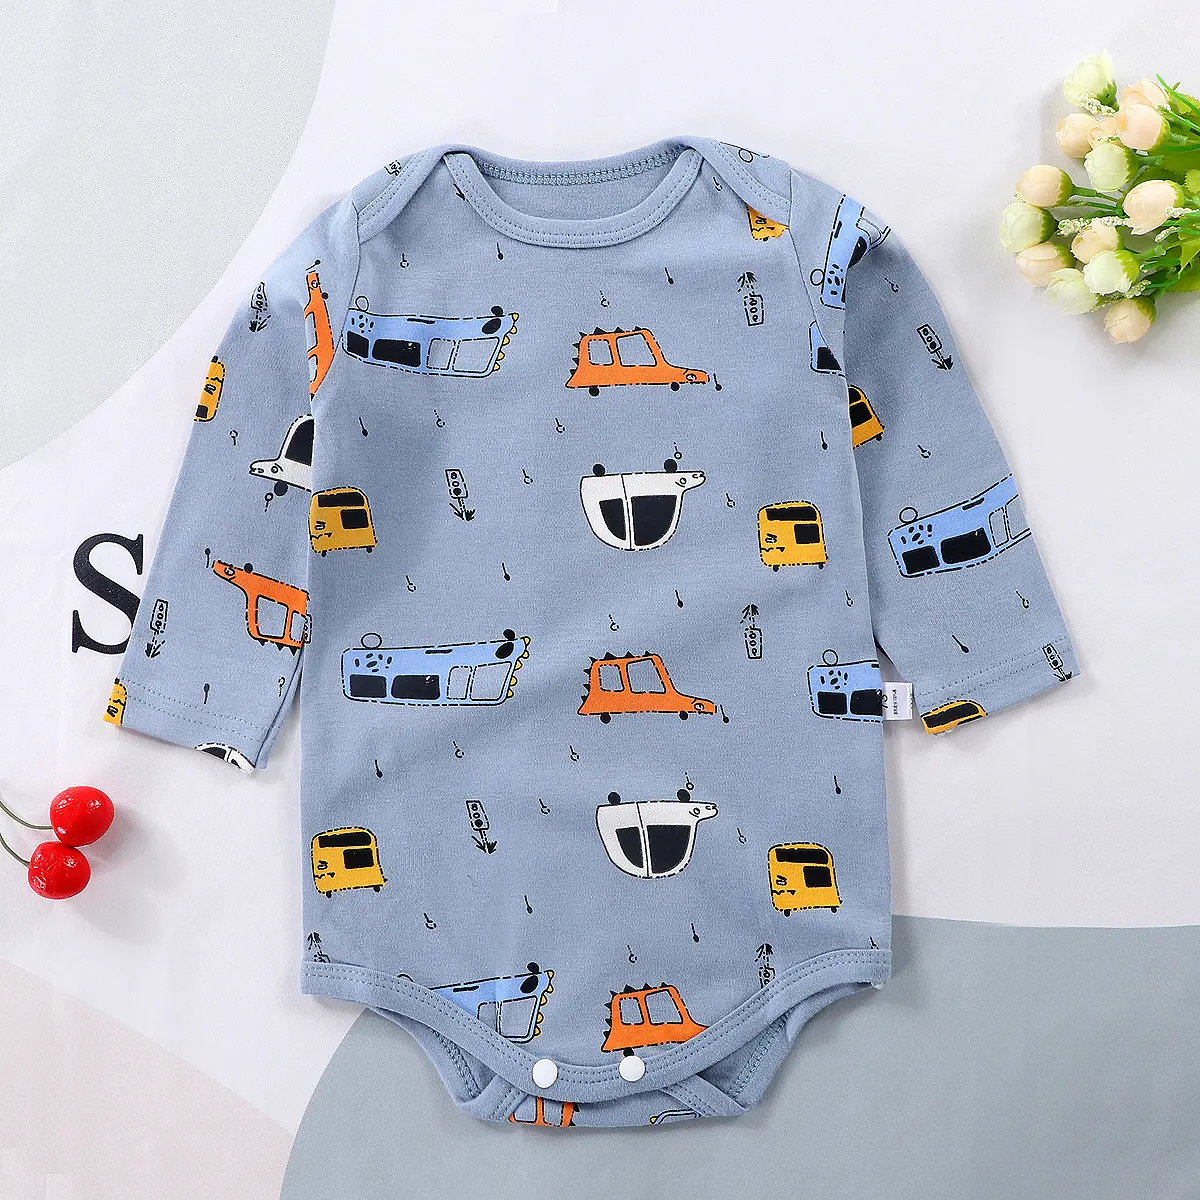 Cute Newborn Babies Sleeveless Romper 5 Pcs Pack Baby Bodysuit Baby Clothing Sets Summer Clothes Infant Cotton Boys Tops